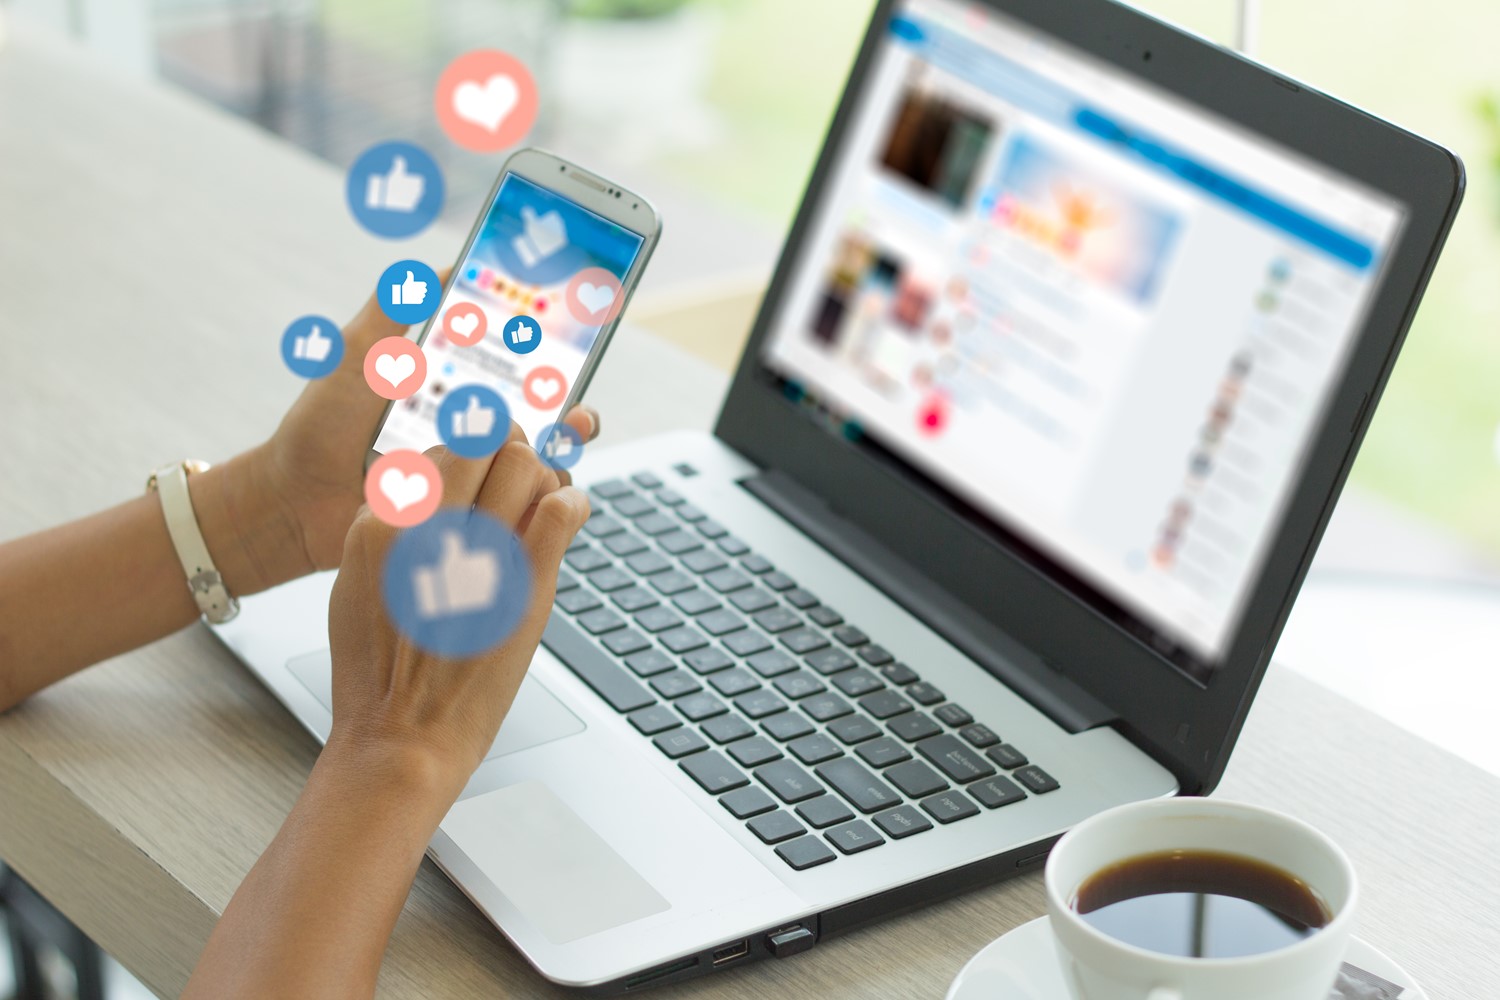 Conceptual Image of Hands Holding a Smartphone with a Laptop in Front of them and Social Media Icons Floating Above the Phone